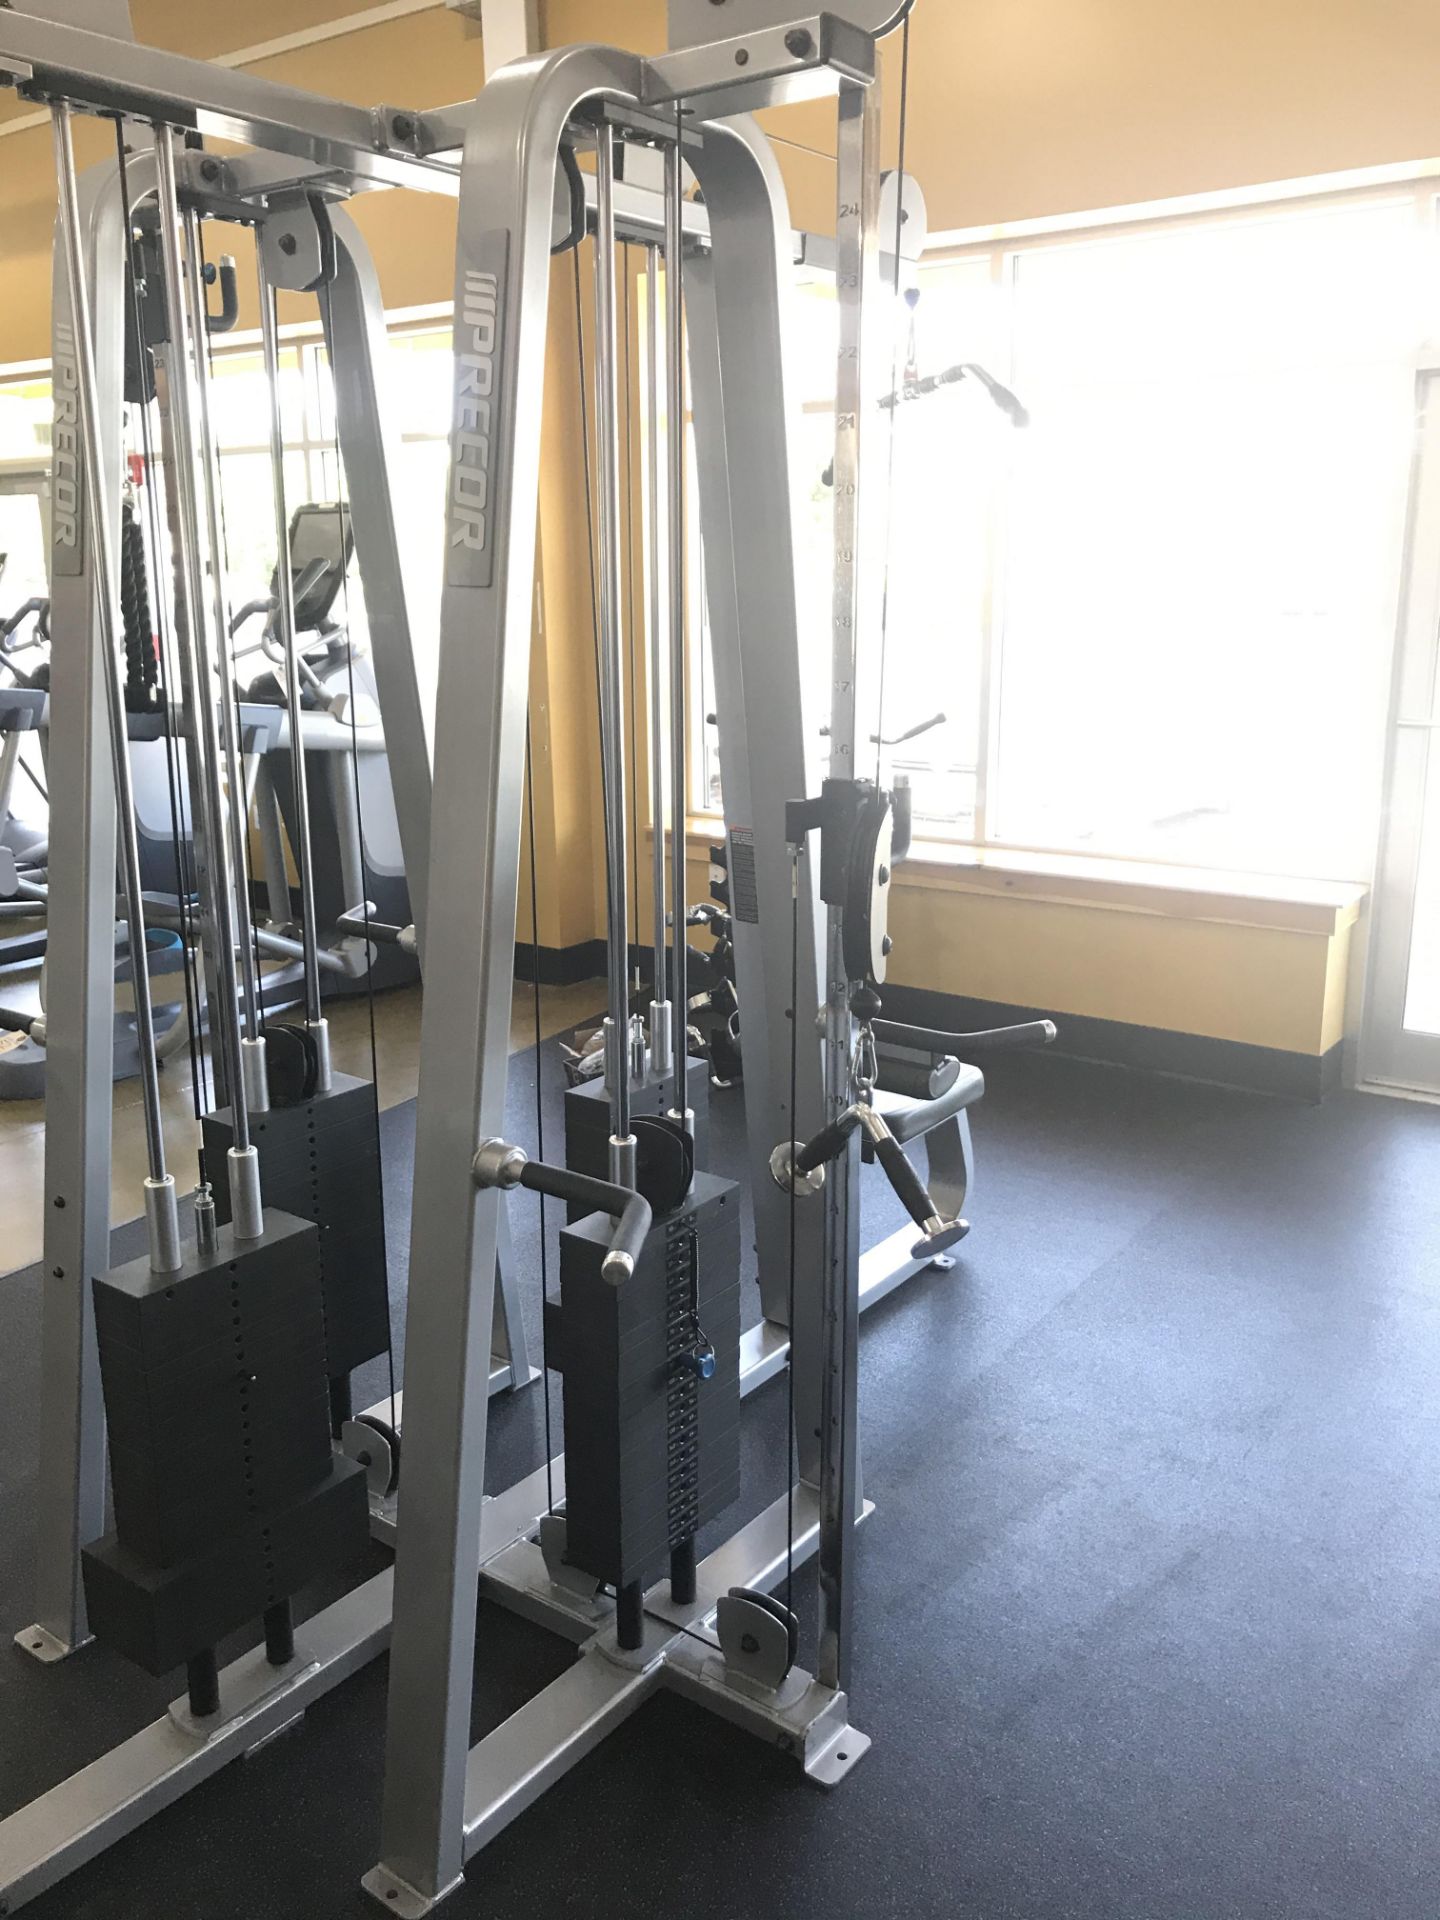 Precor MultiFunction Gym Including: Pulldown 304 (250lbs max), Longpull 302 (250lbs Max), 2 - Image 5 of 8